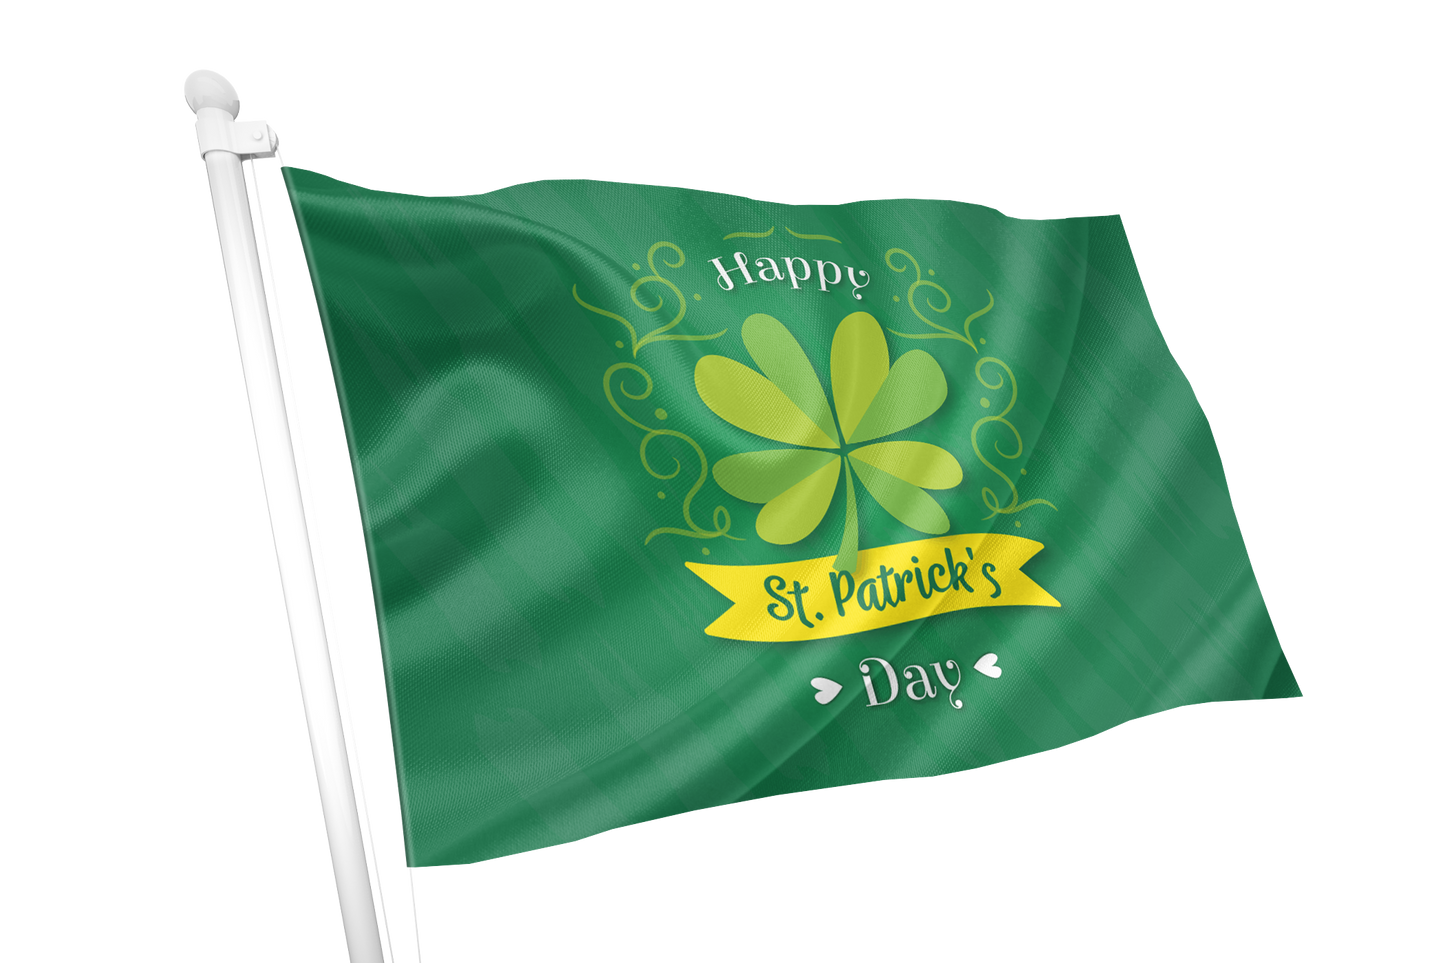 Irland-Rugby-Wappenflagge